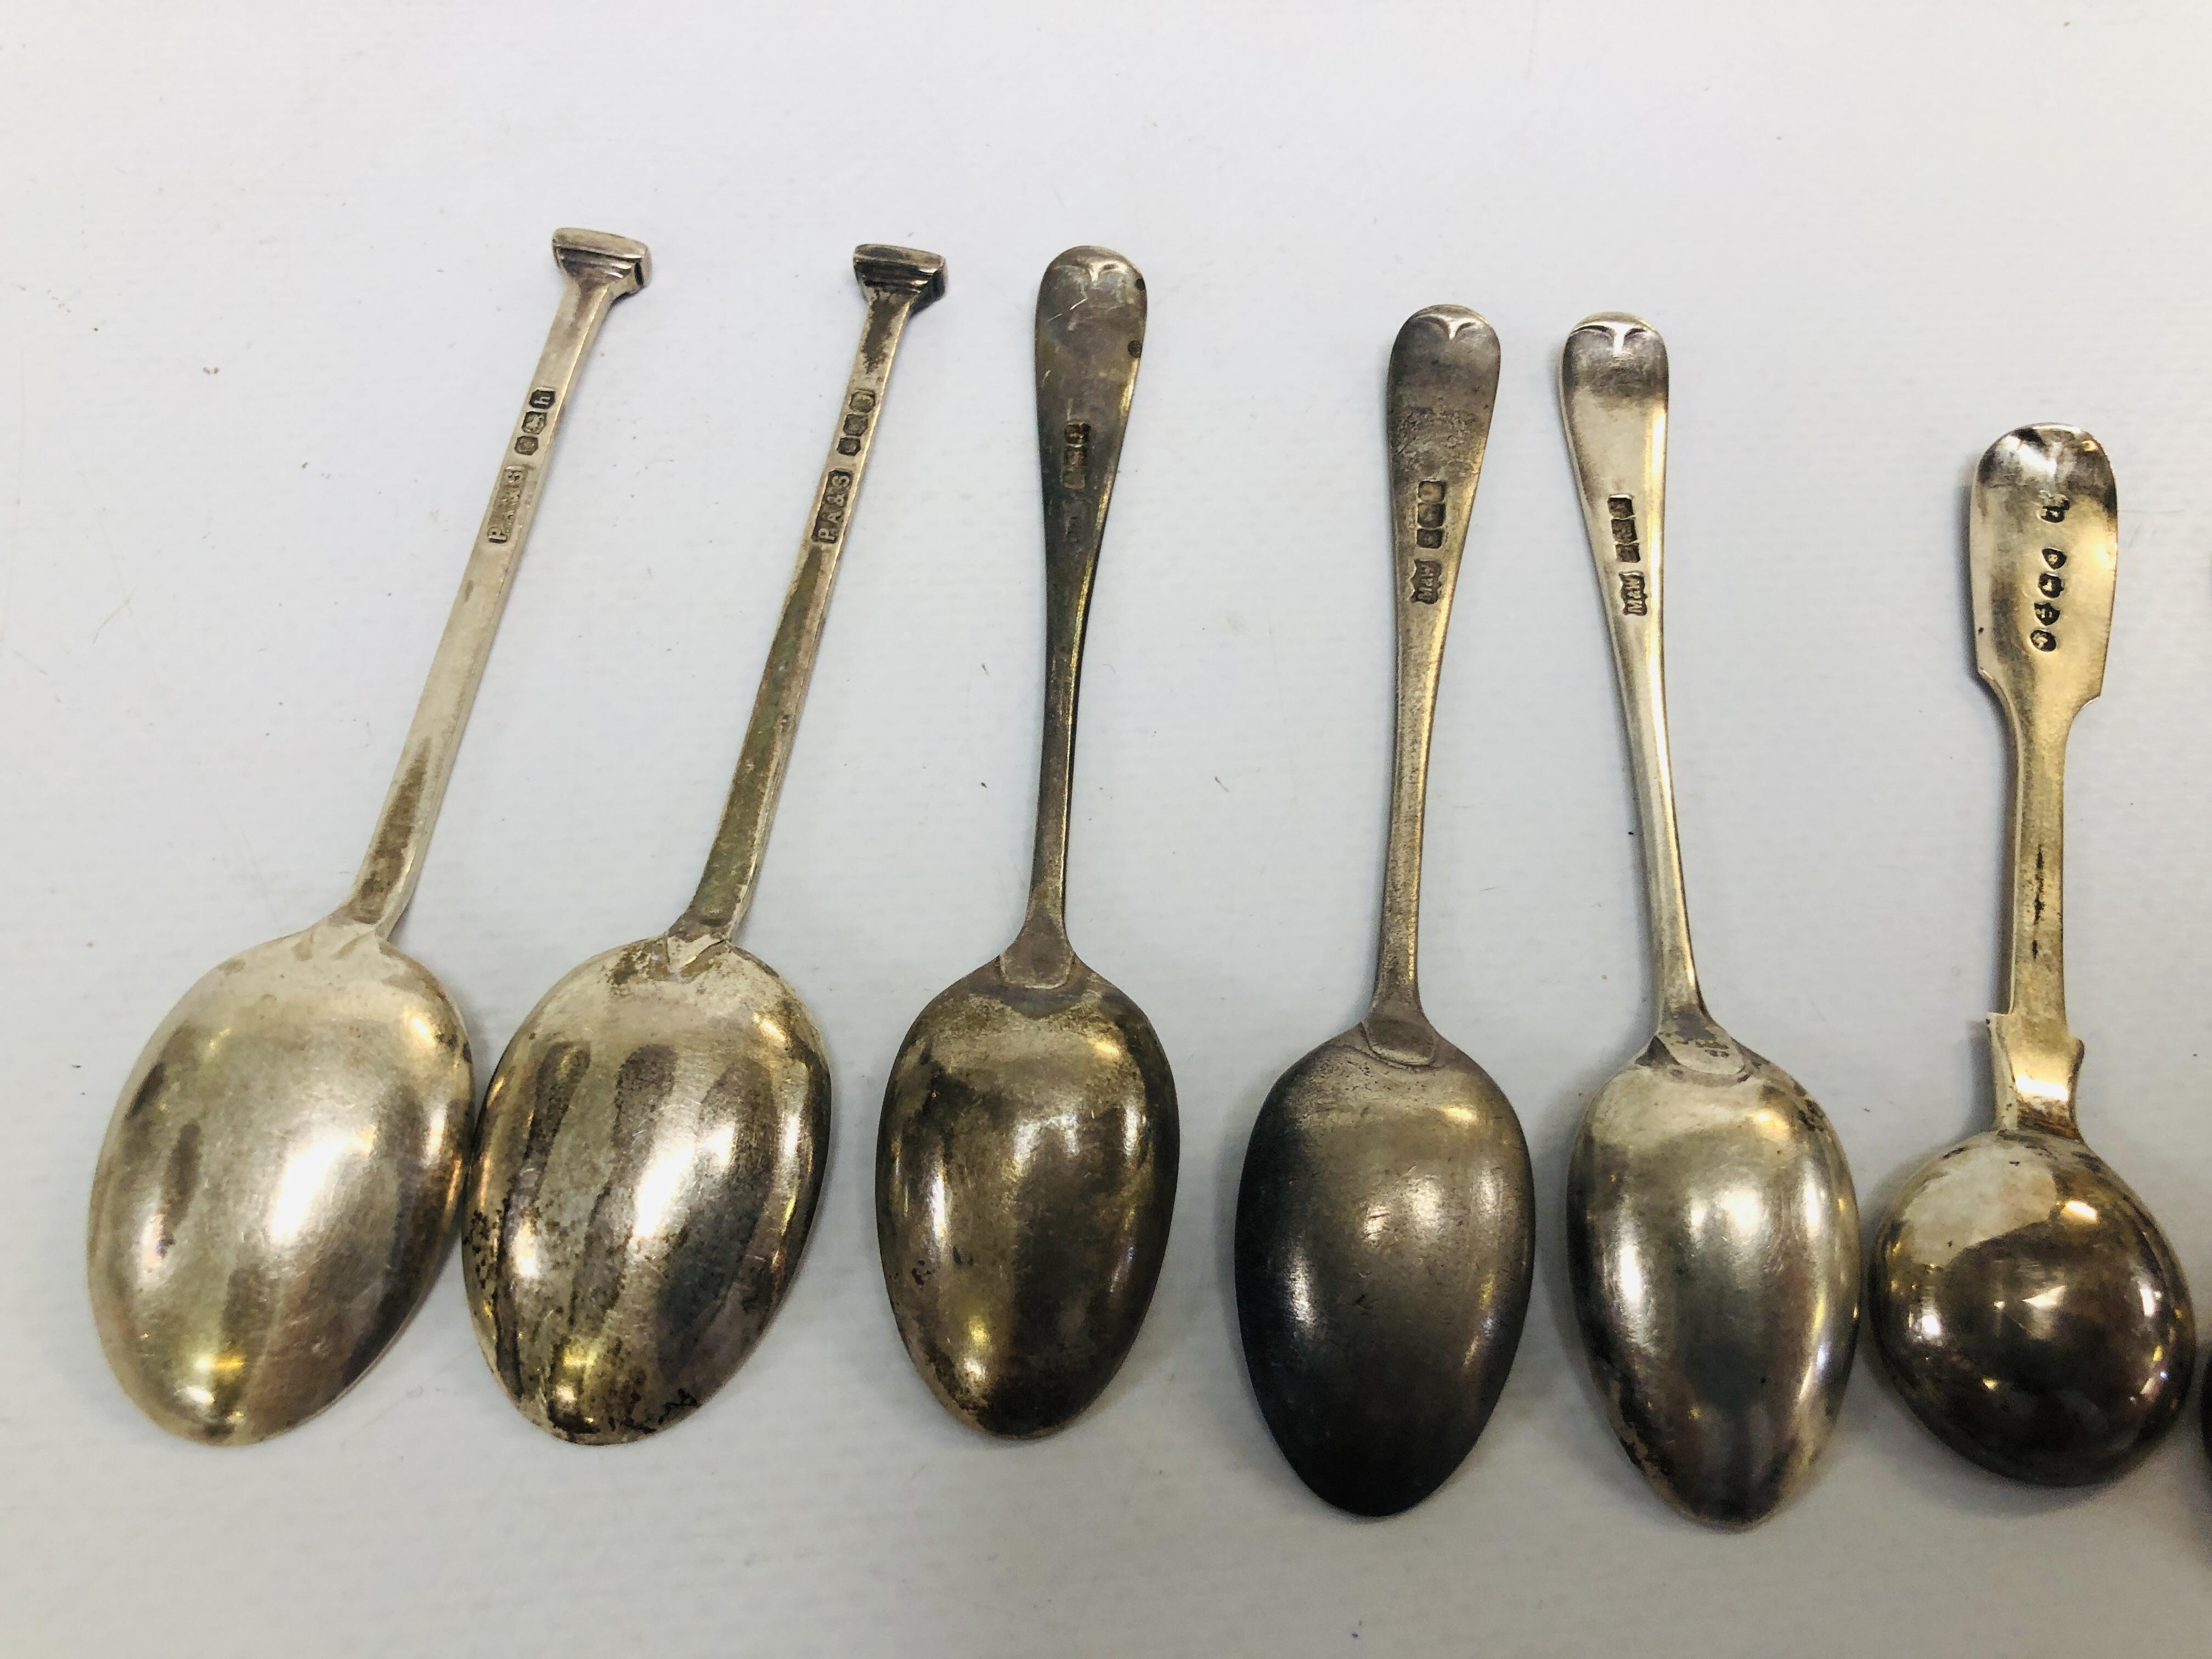 FOUR C19th OLD ENGLISH PATTERN SILVER GILT SALT SPOONS ALONG WITH THREE SILVER EGGS AND TWO SILVER - Image 5 of 8